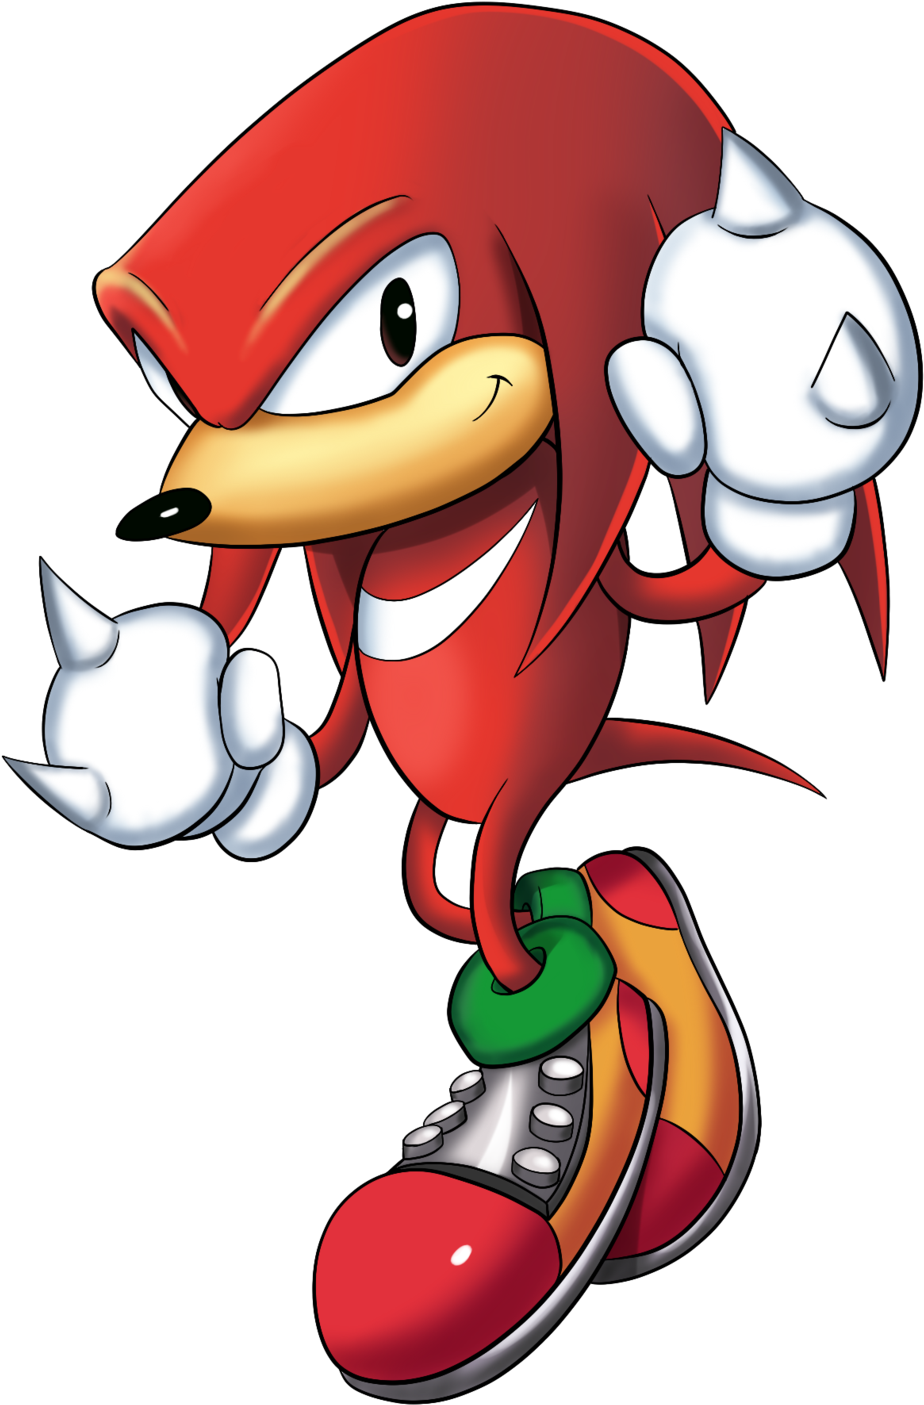 Download Sonic Mania Knuckles Png PNG Image with No Background - PNGkey.com